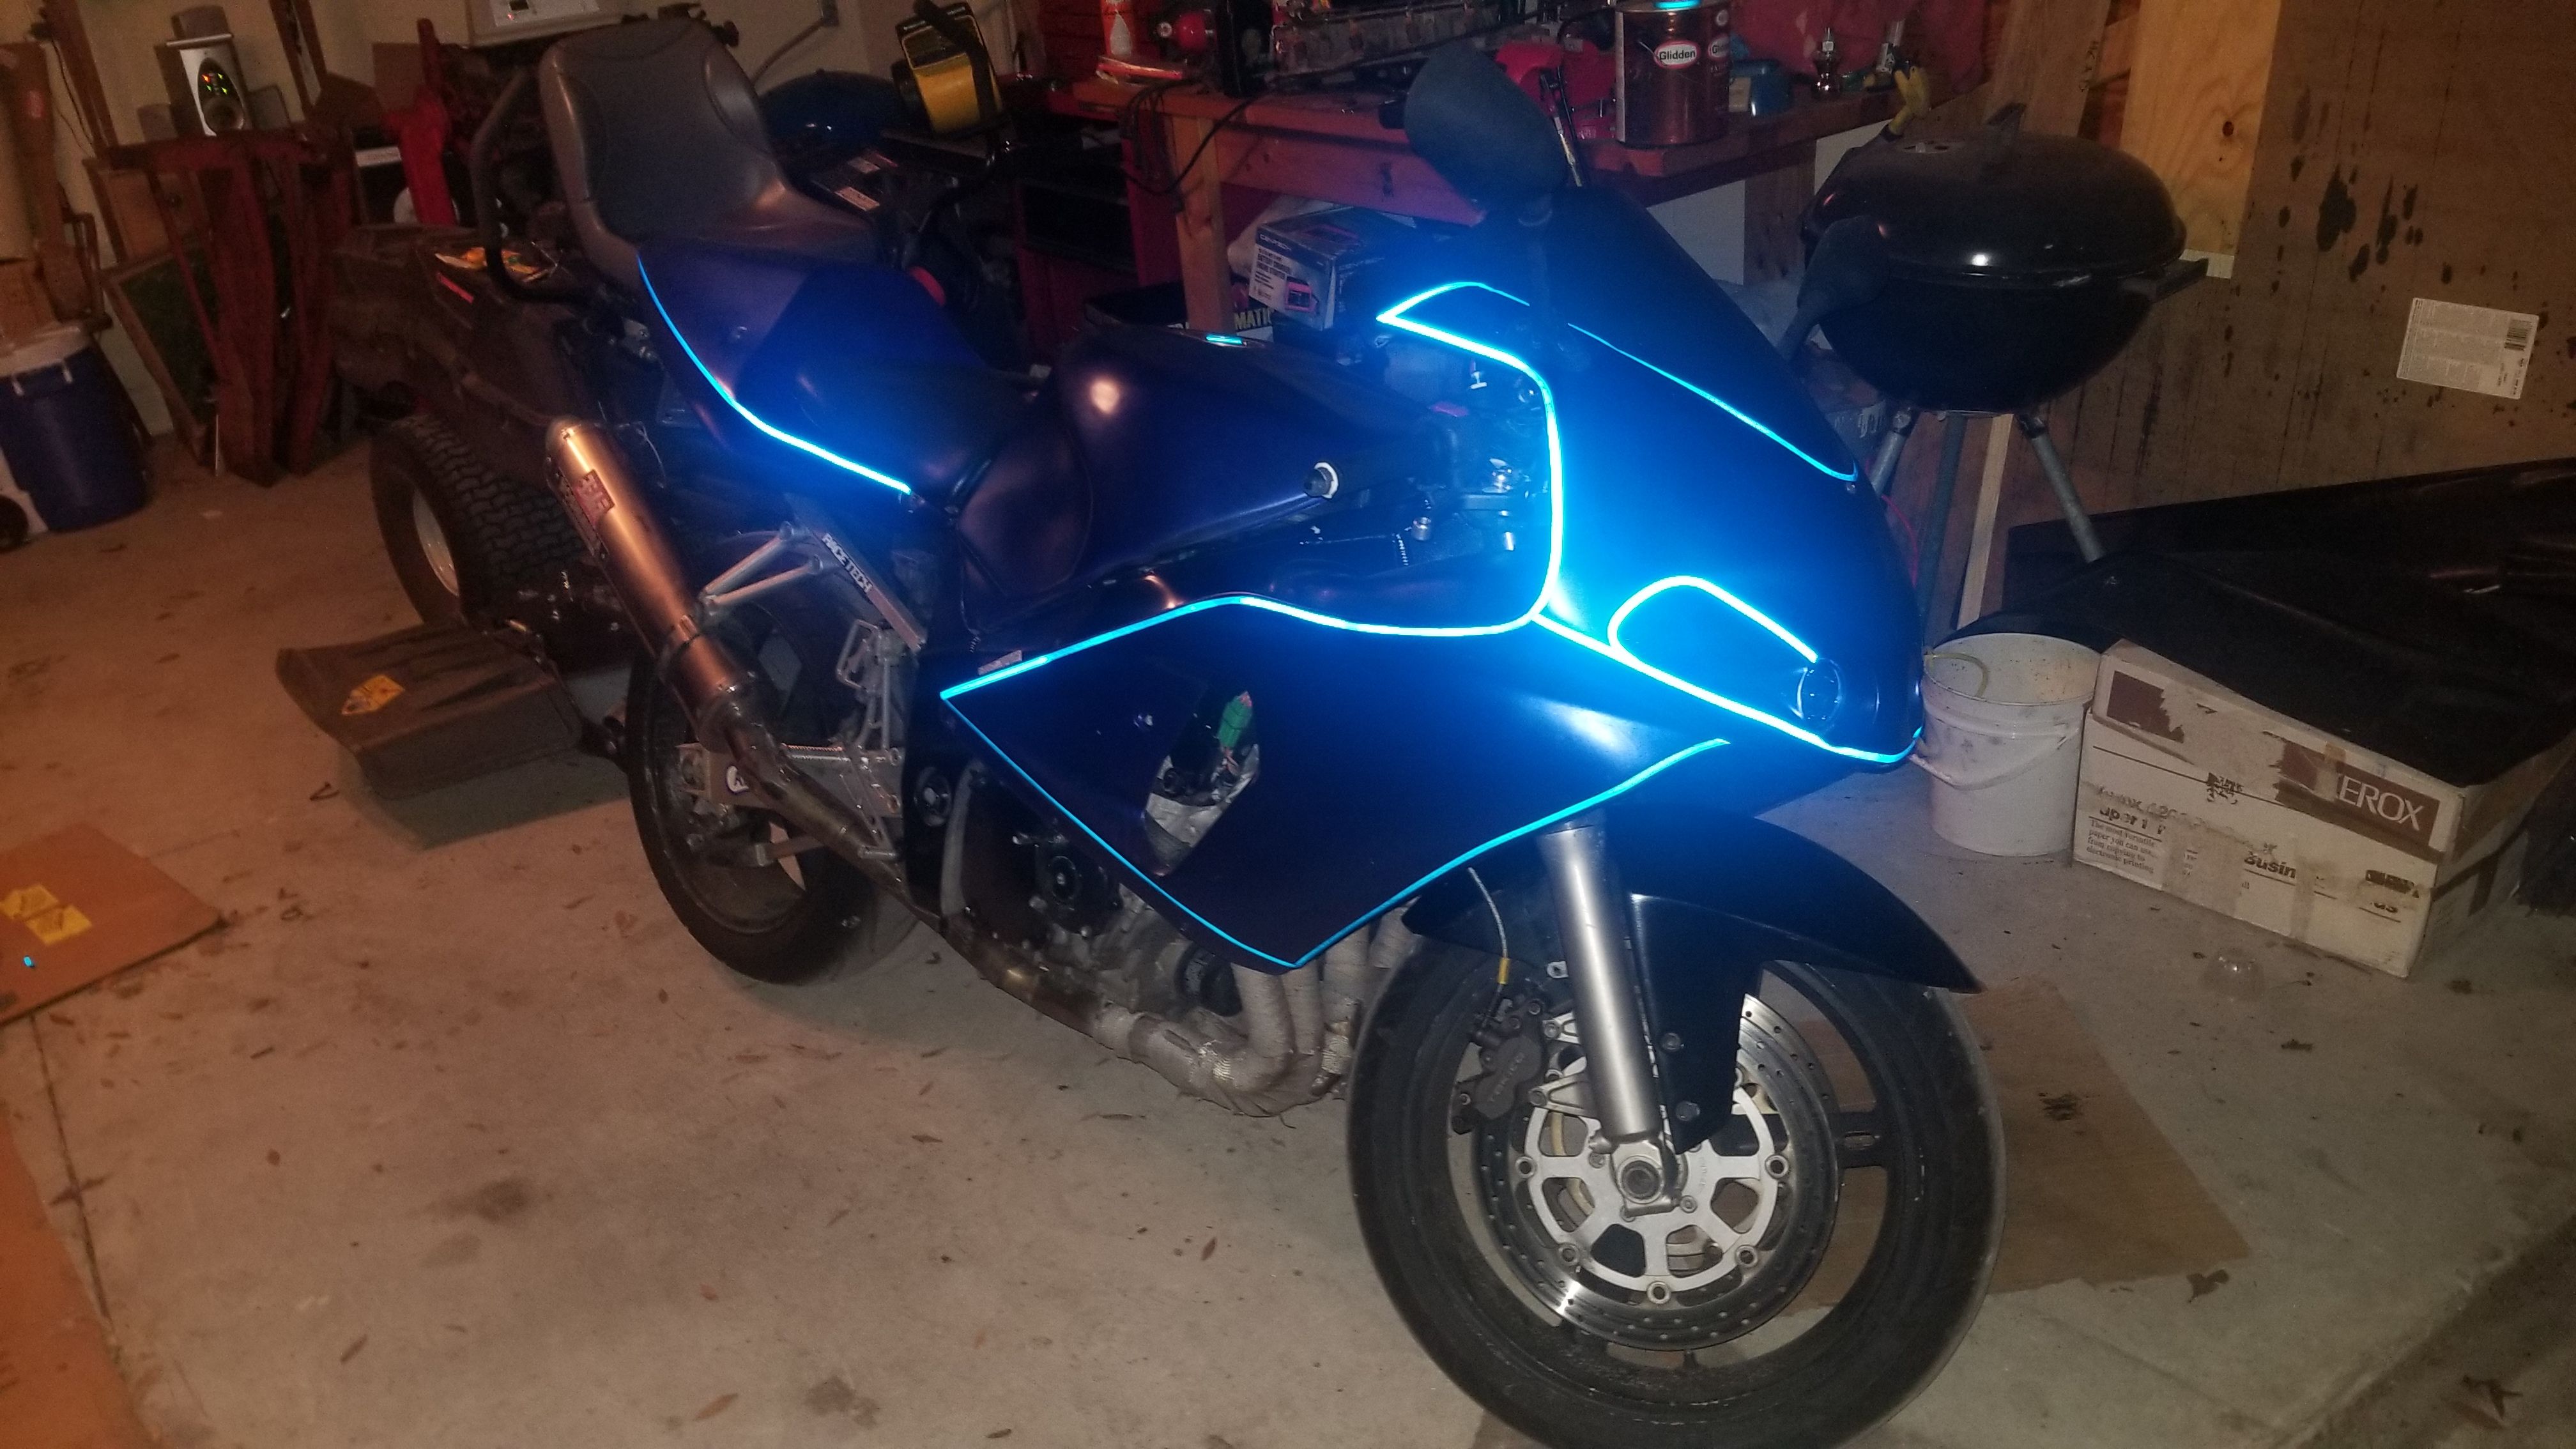 Right after I put reflective tape on it.